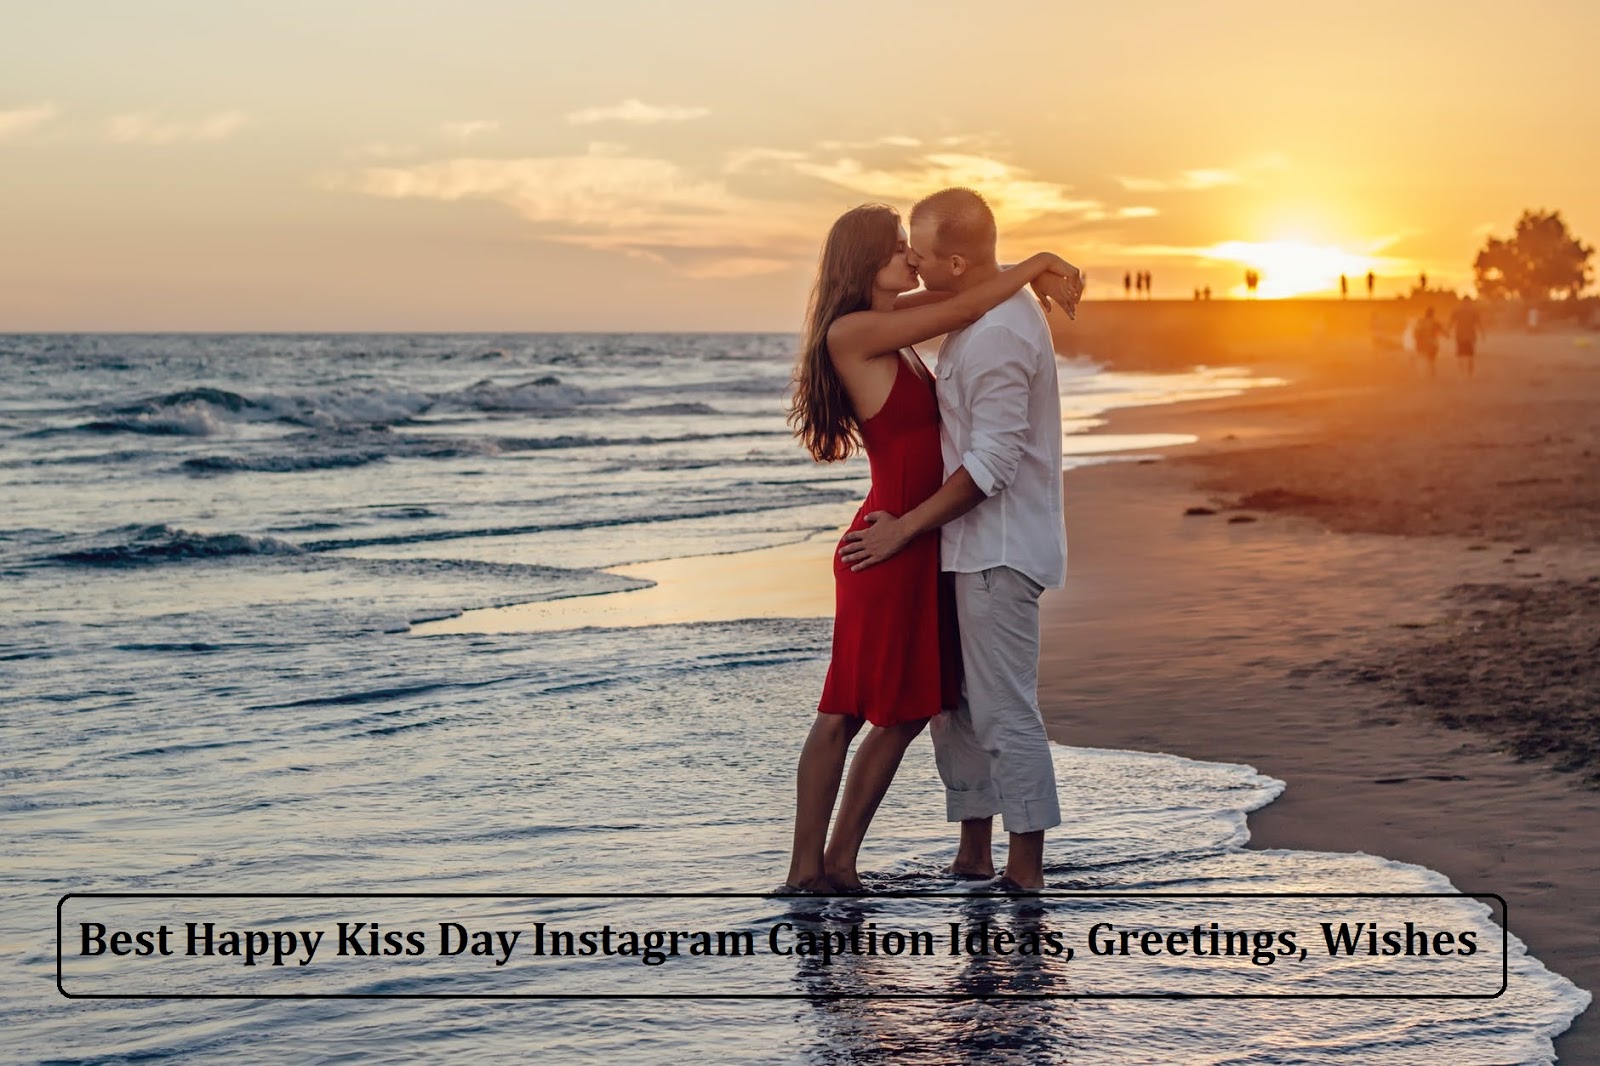 111 Best Happy Kiss Day Instagram Caption Ideas Greetings Wishes